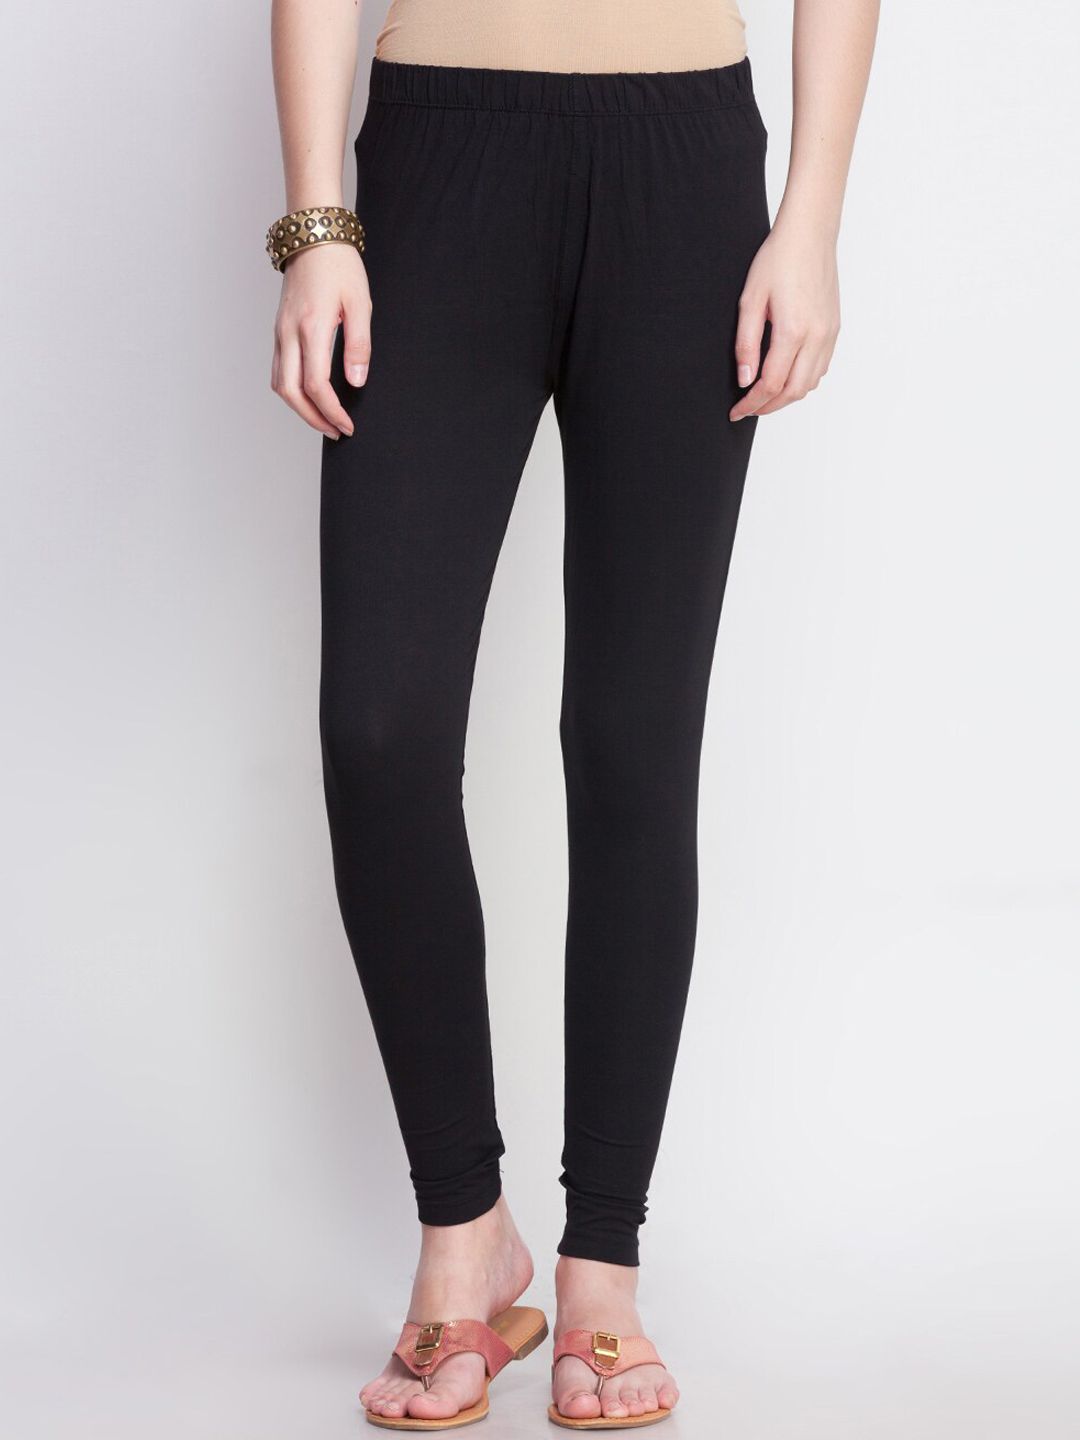 Dollar Missy Women Black Solid Cotton Slim-Fit Ankle-Length Leggings Price in India